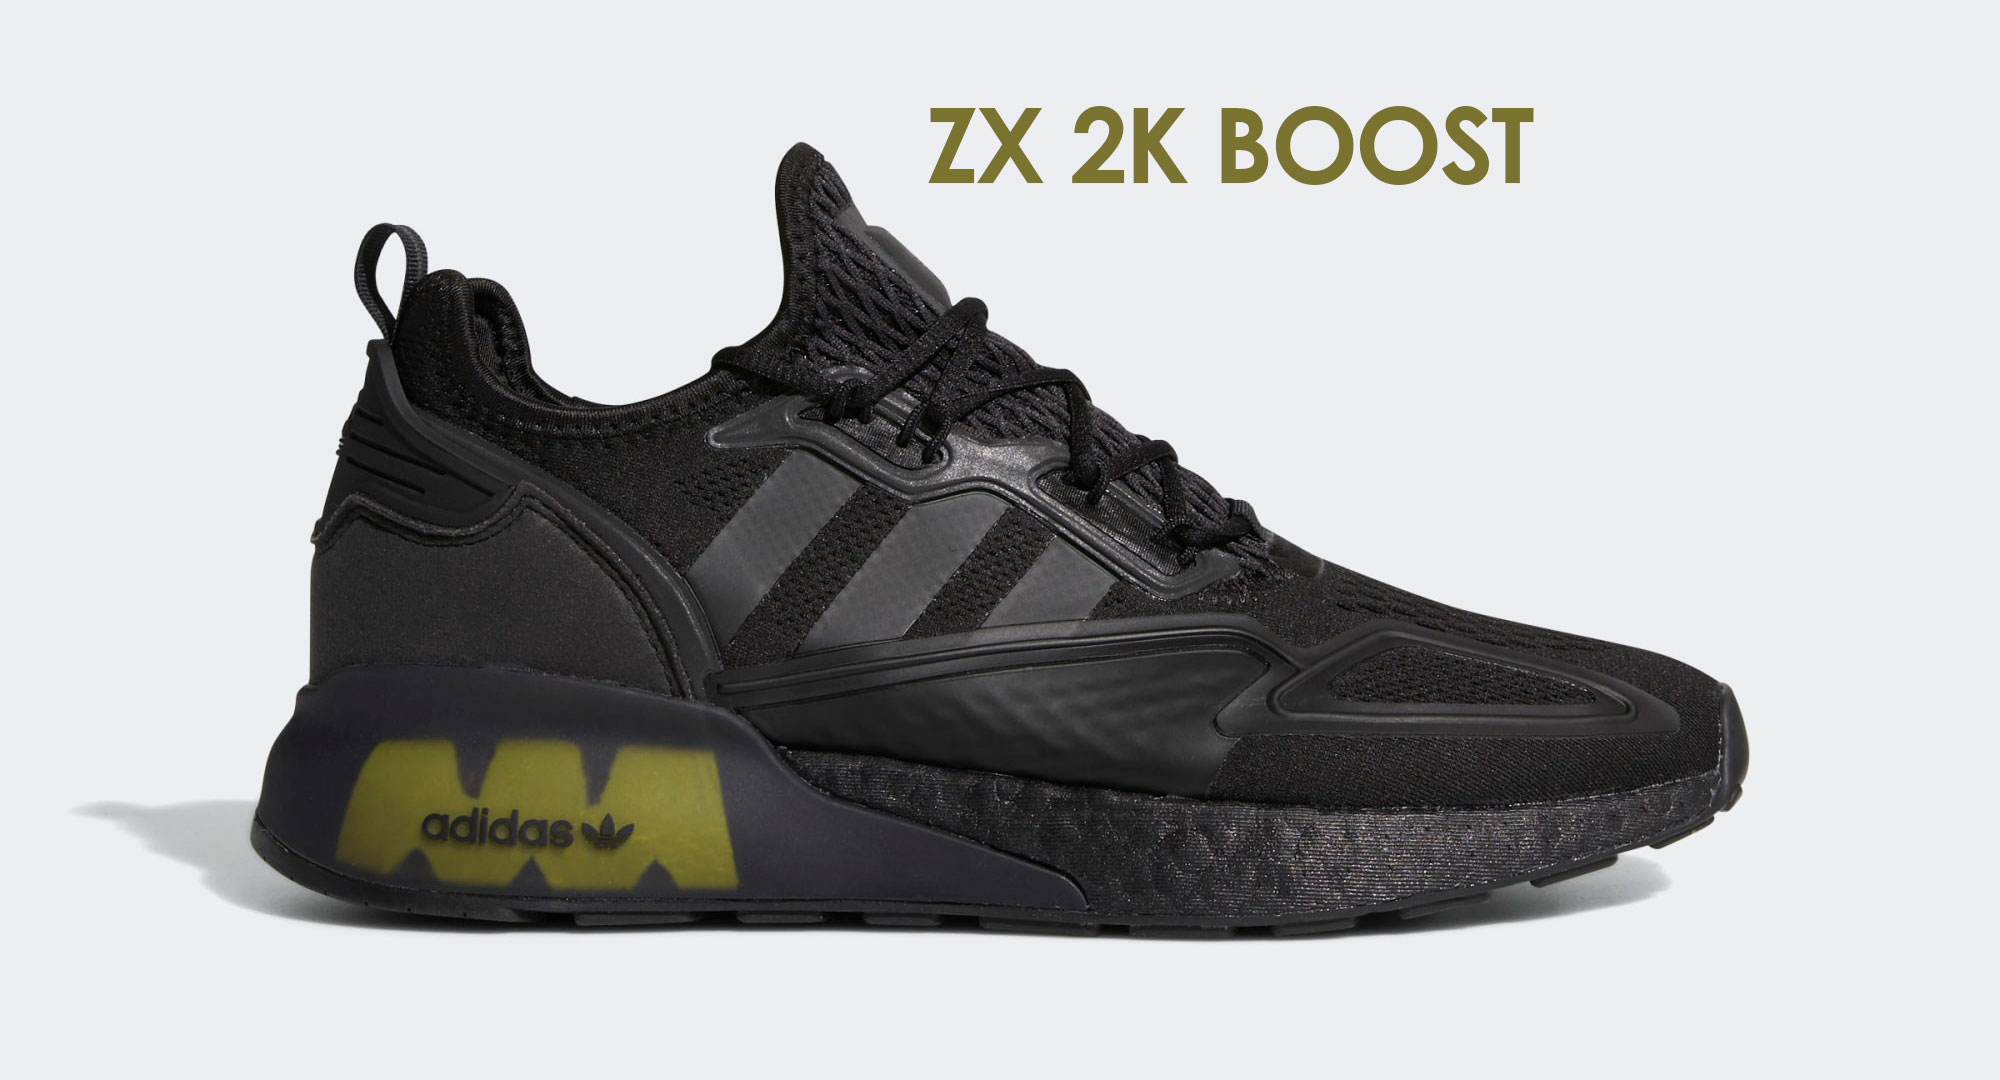 Adidas ZX 2K Boost Size Chart and 